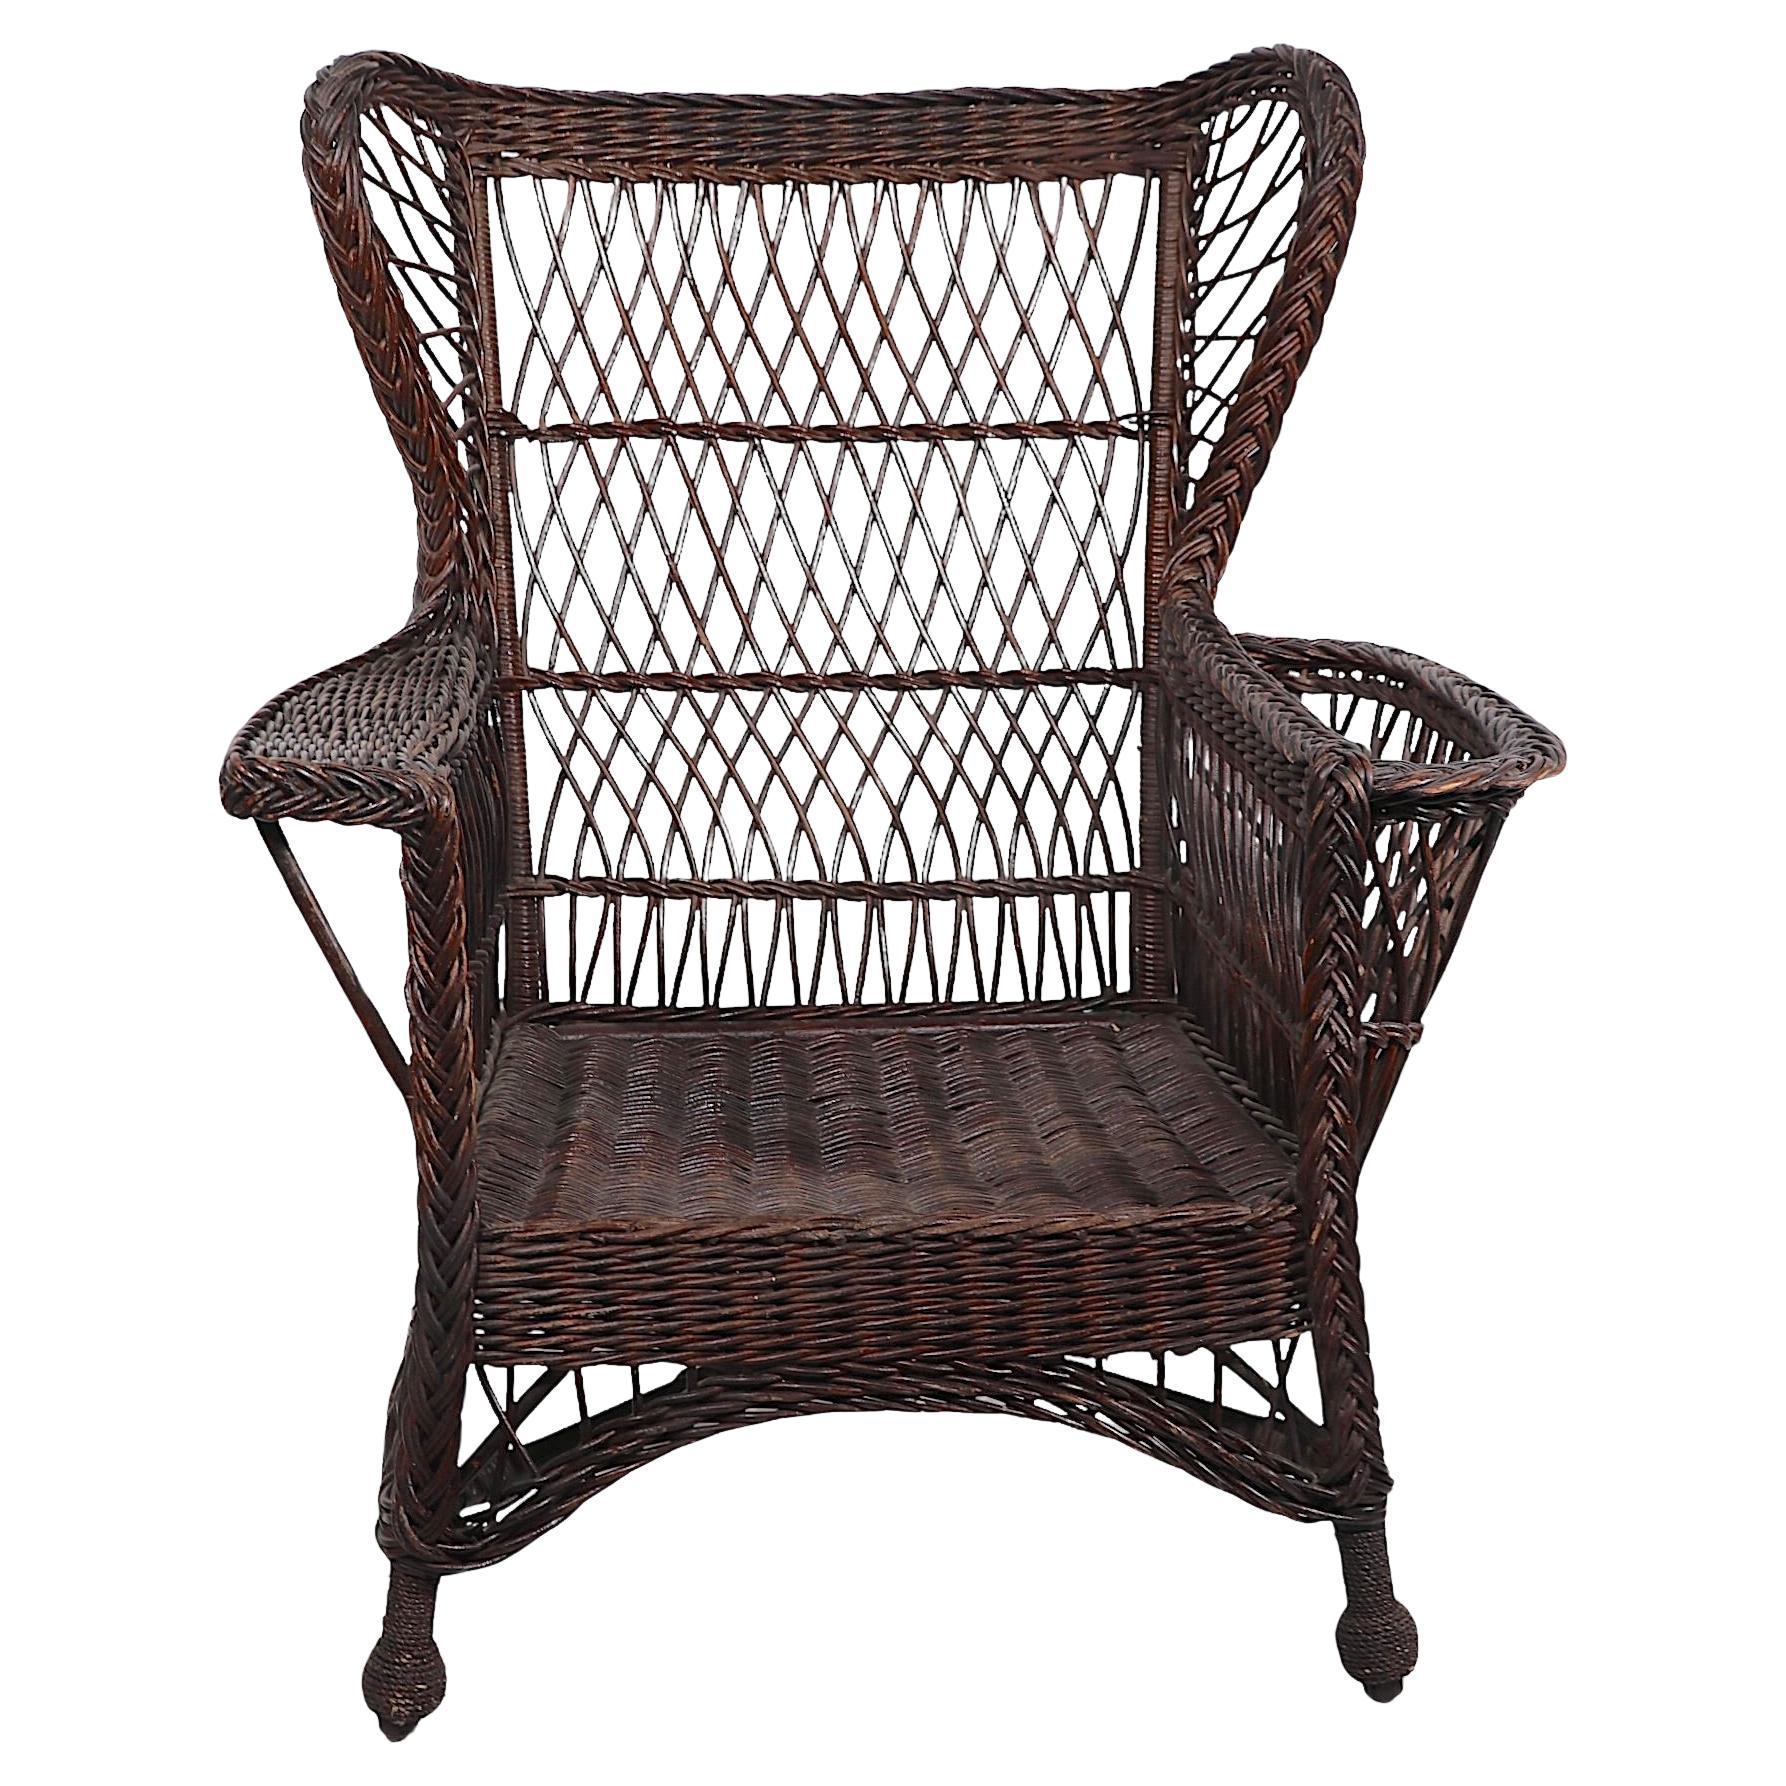 Victorian Bar Harbor Wicker Wing Chair with Magazine Rack Arm